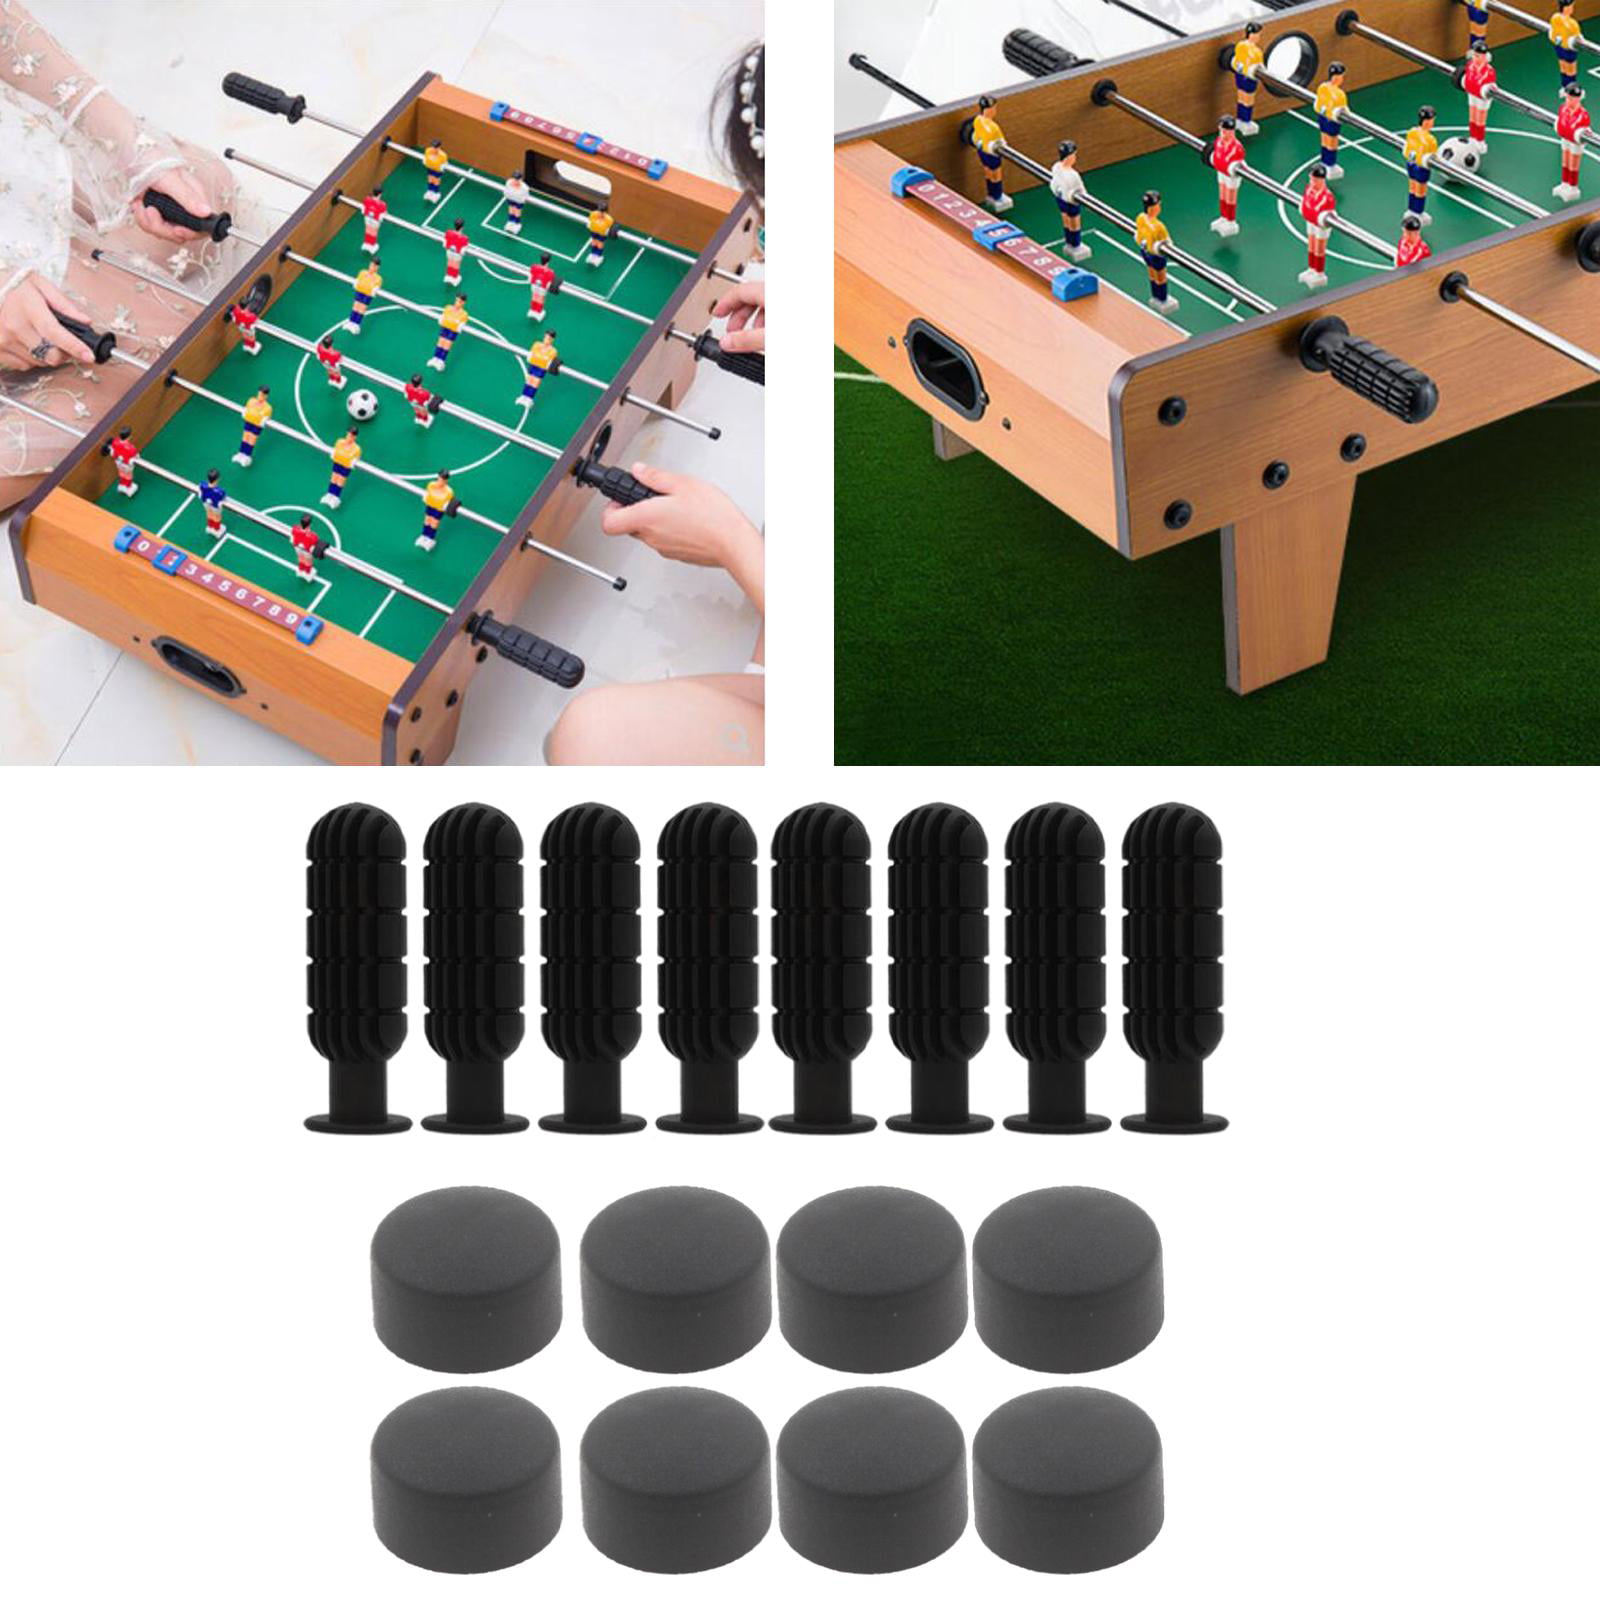 8 Black Rubber Foosball Handles to fit 1/2" Foosball Table Rods Table Soccer 